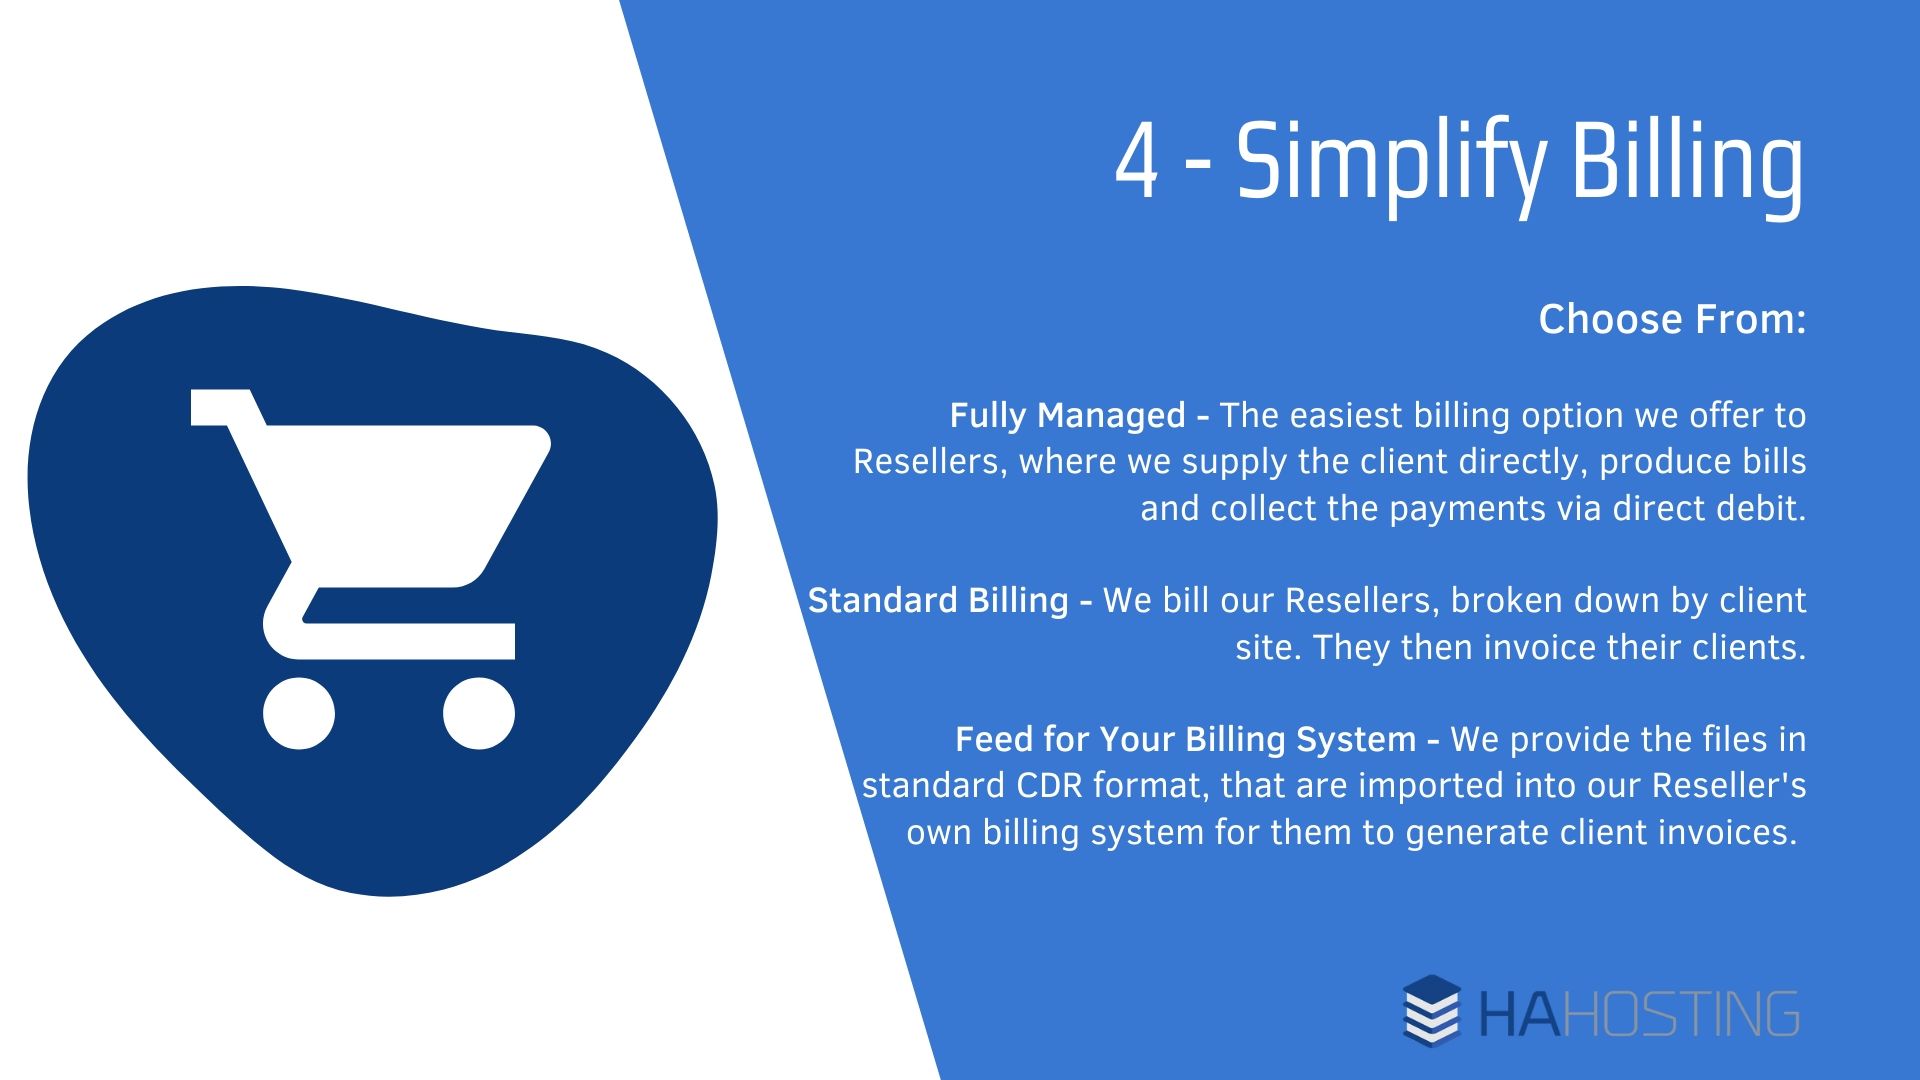 Simplifying billing - Fully Managed - The easiest billing option we offer to Resellers, where we supply the client directly, produce bills and collect the payments via direct debit. Standard Billing - We bill our Resellers, broken down by client site. They then invoice their clients. Feed for Your Billing System - We provide the files in standard CDR format, that are imported into our Reseller's own billing system for them to generate client invoices.